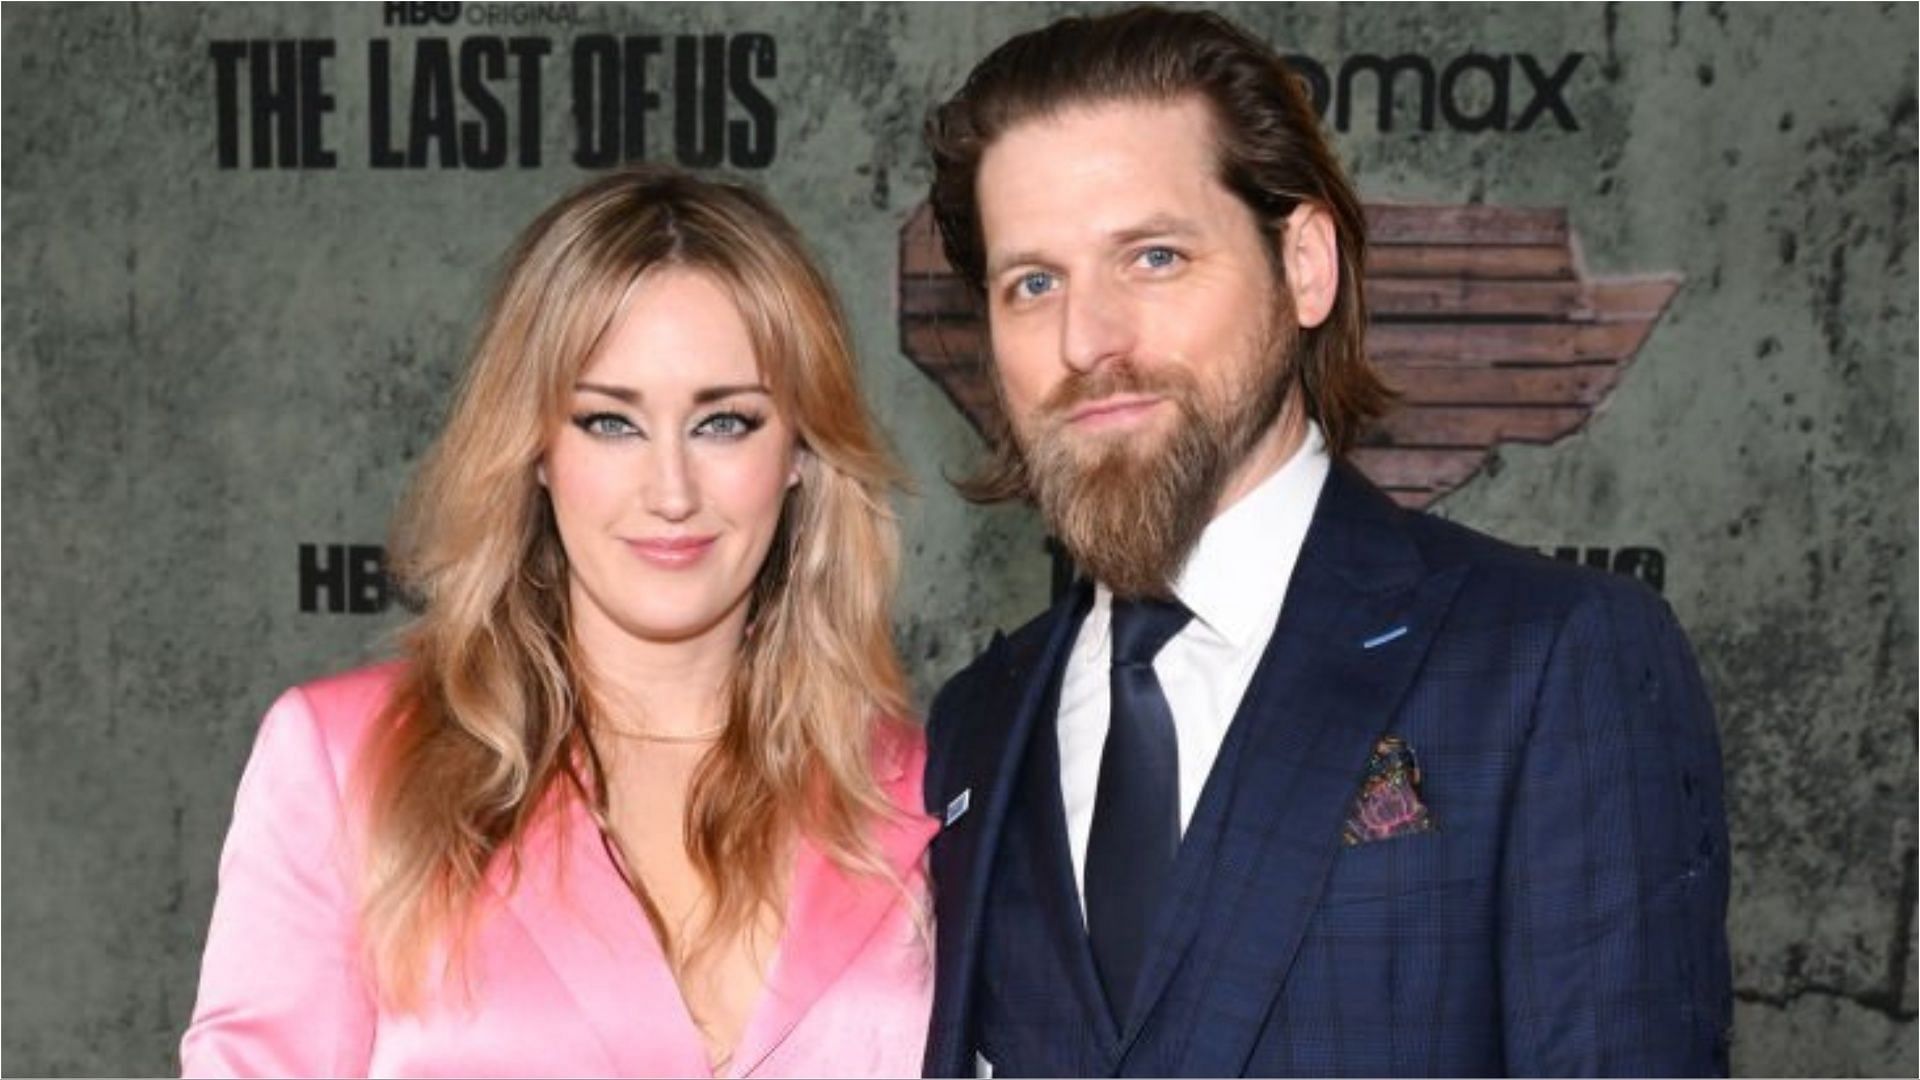 The Last of Us star Ashley Johnson devastated by ending